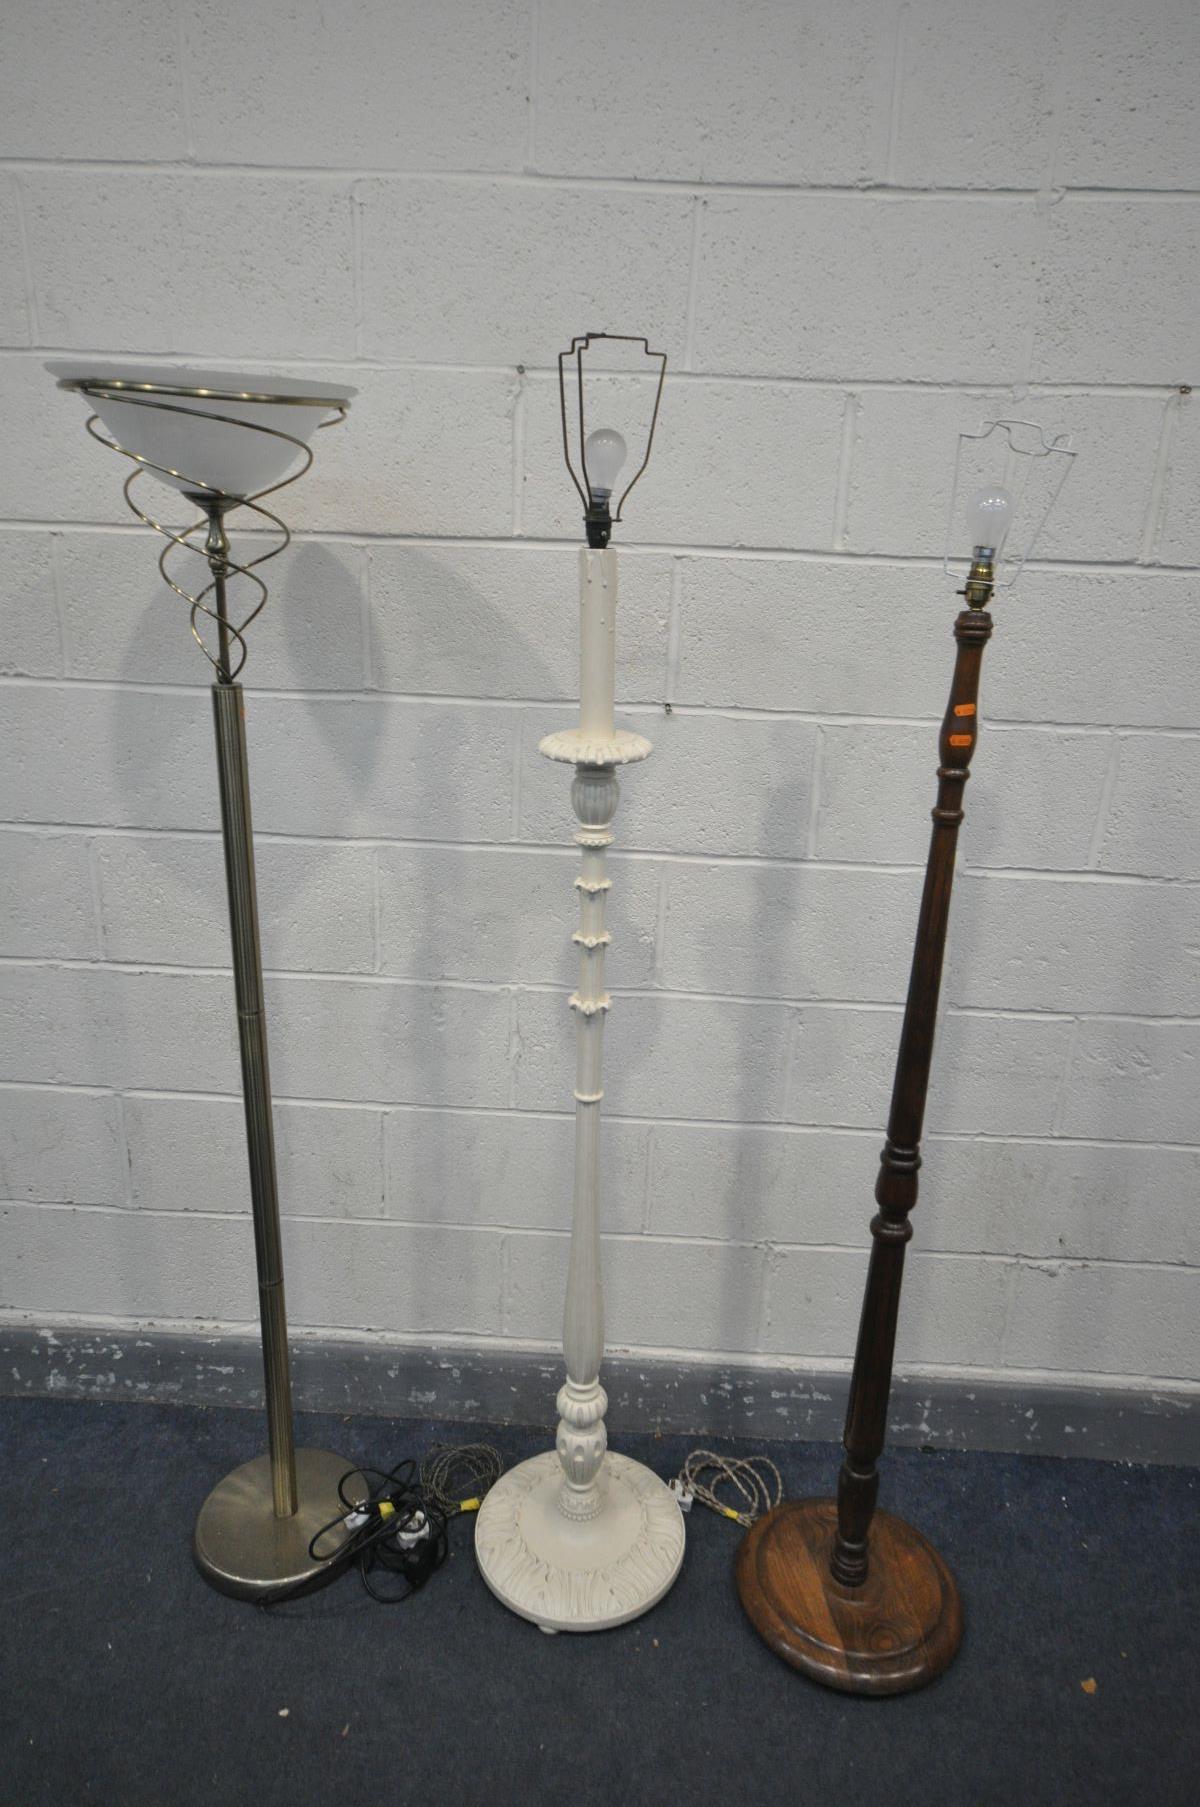 THREE VARIOUS STANDARD LAMPS, to include a Nikel uplighter lamp